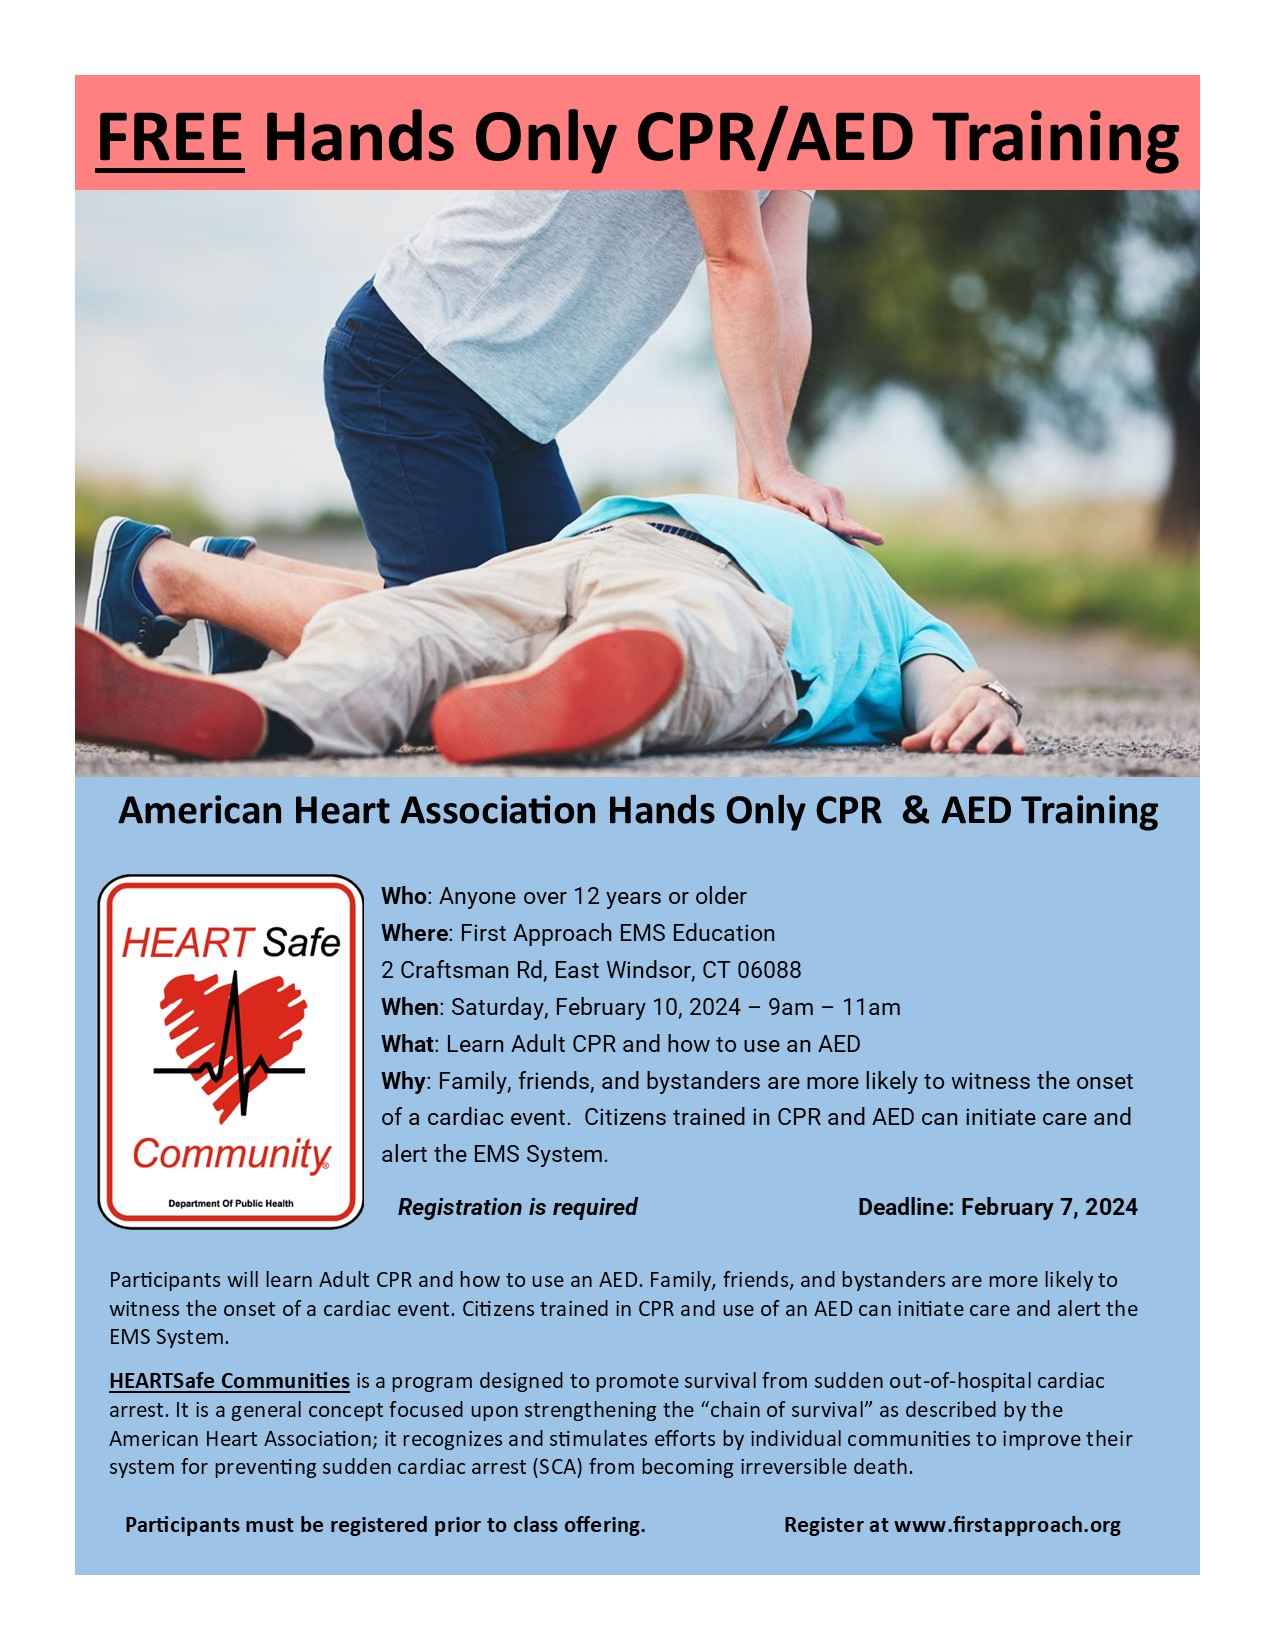 FREE Hands Only CPR/AED Training @ First Approach EMS Education